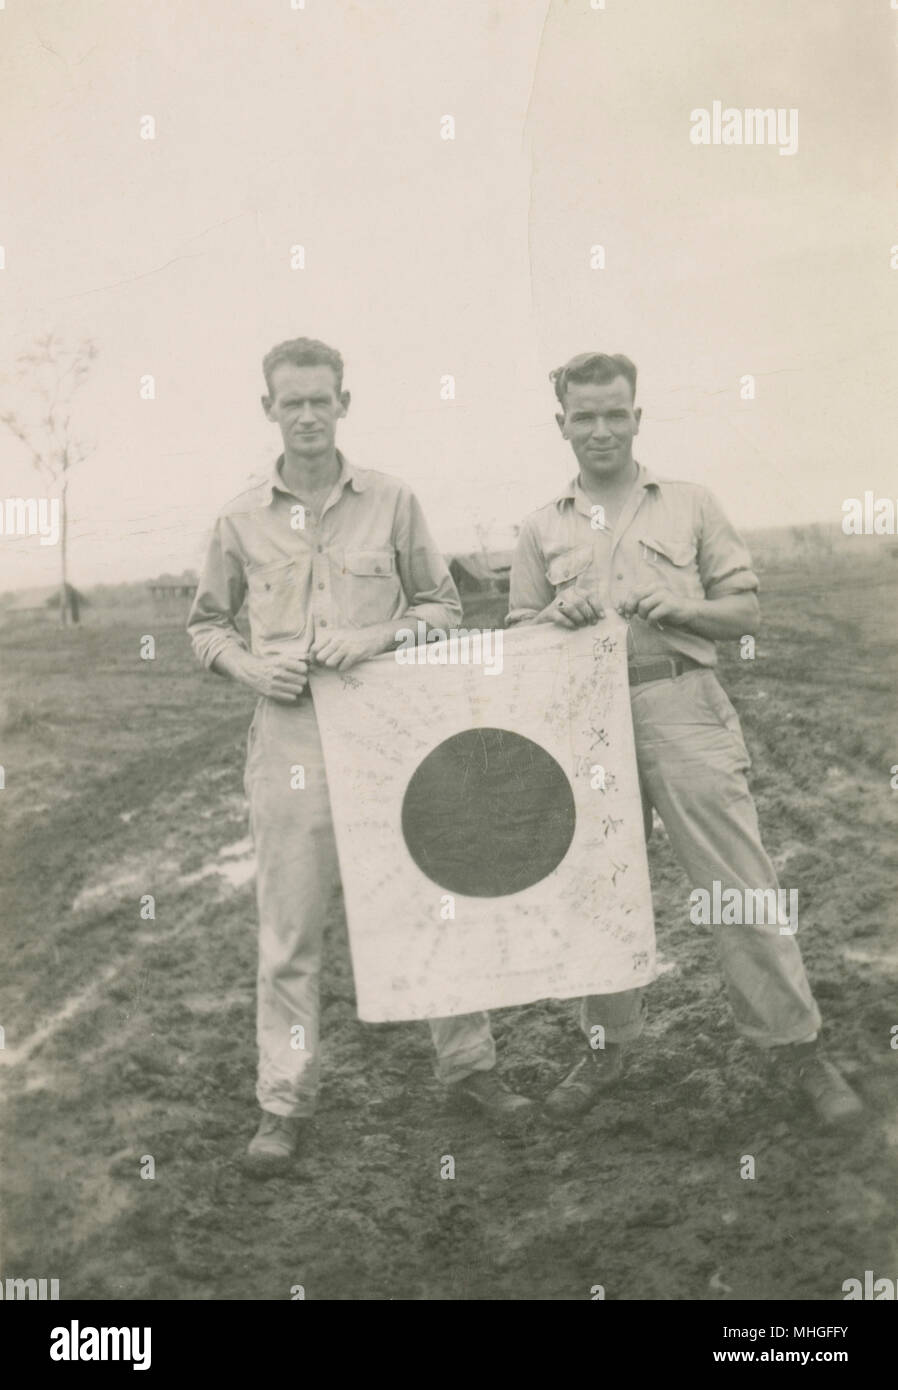 Antique 1944 photograph, two American soldiers hold a Japanese Good Luck Flag in New Guinea. SOURCE: ORIGINAL PHOTOGRAPHIC PRINT. Stock Photo